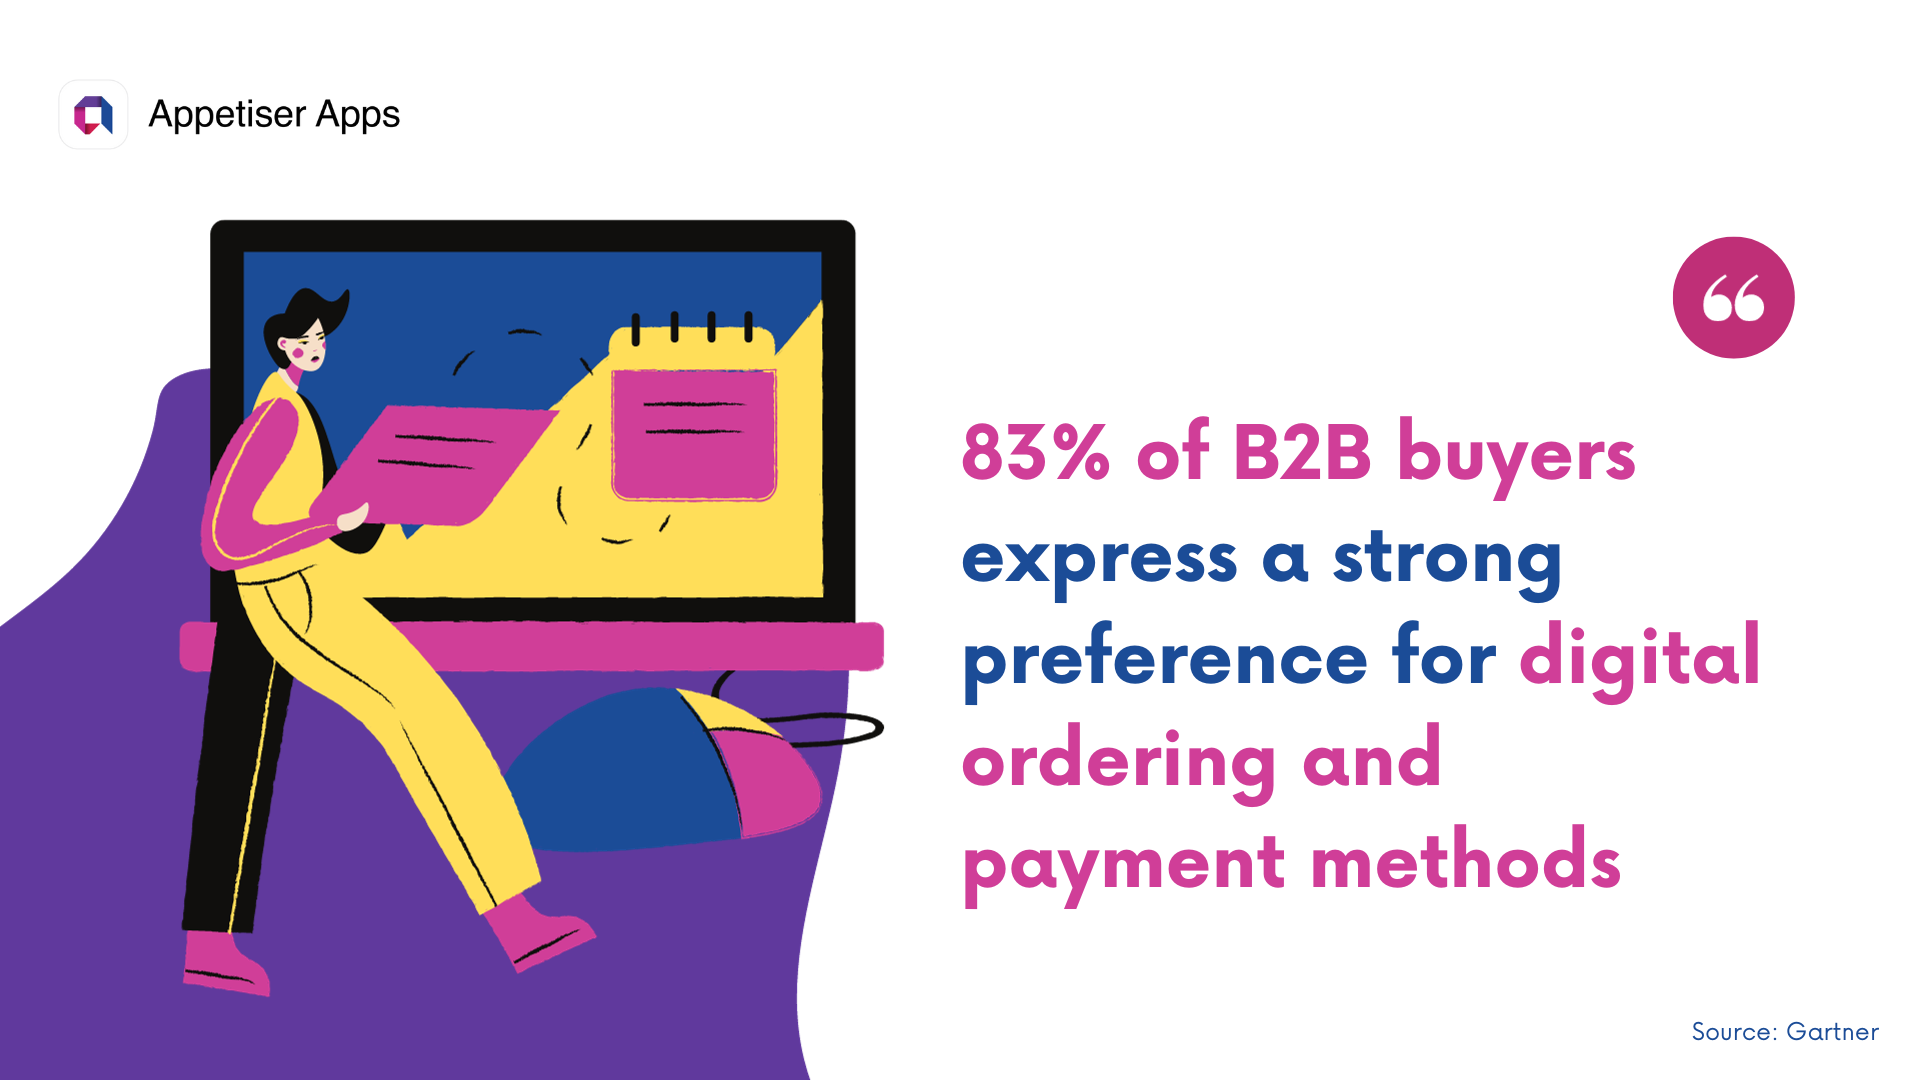 BETS: B2B ecommerce trends and statistics on B2B buyers for payment methods